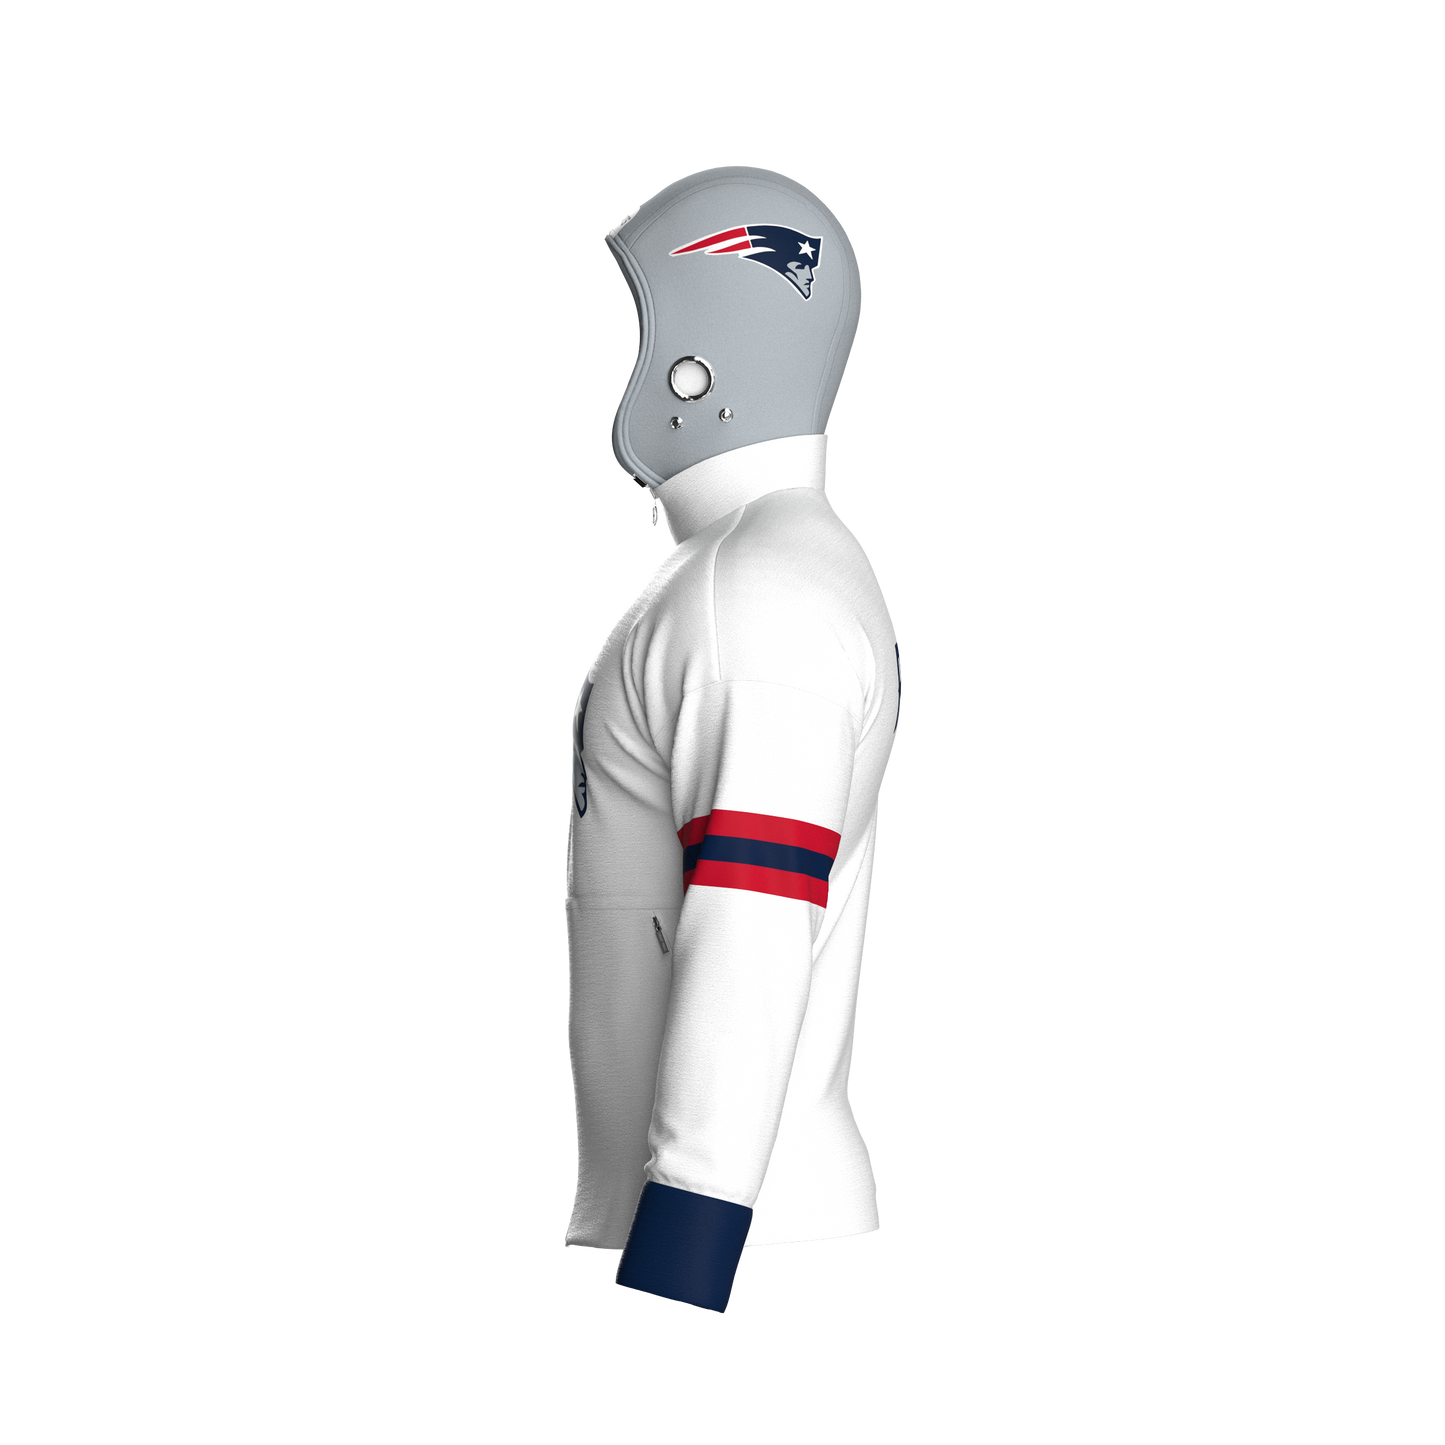 New England Patriots Away Zip-Up (youth)